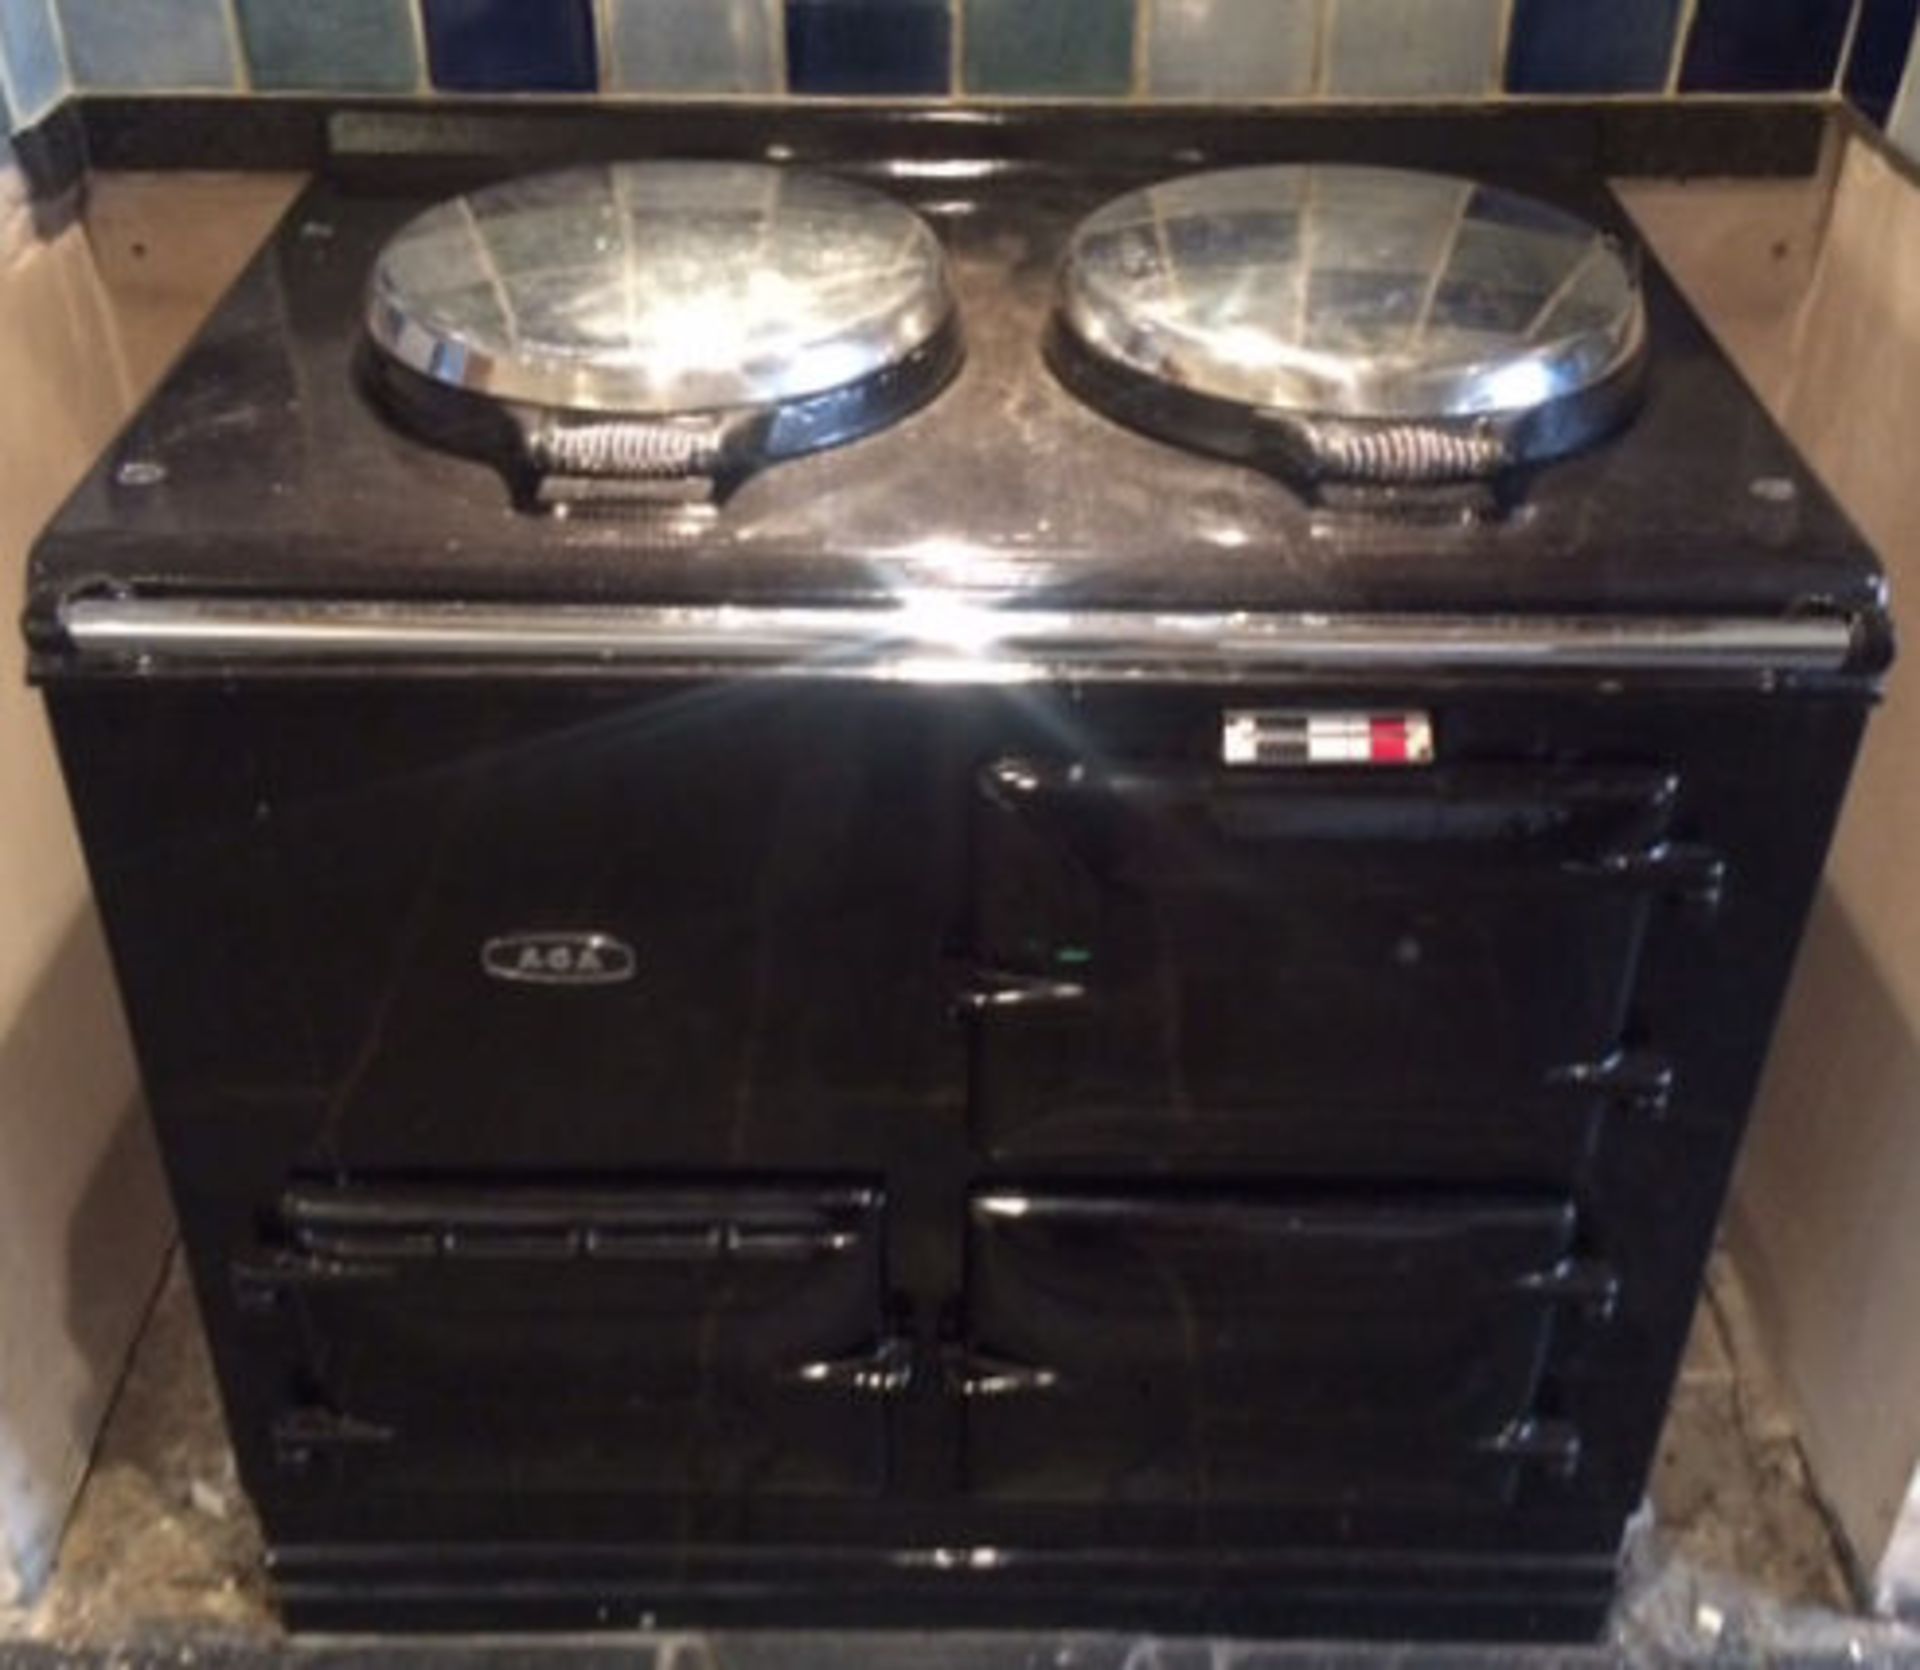 1 x Aga 2-Oven Gas Range Cooker - Cast Iron With Black Enamel Finish - Preowned - NO VAT - Image 10 of 10